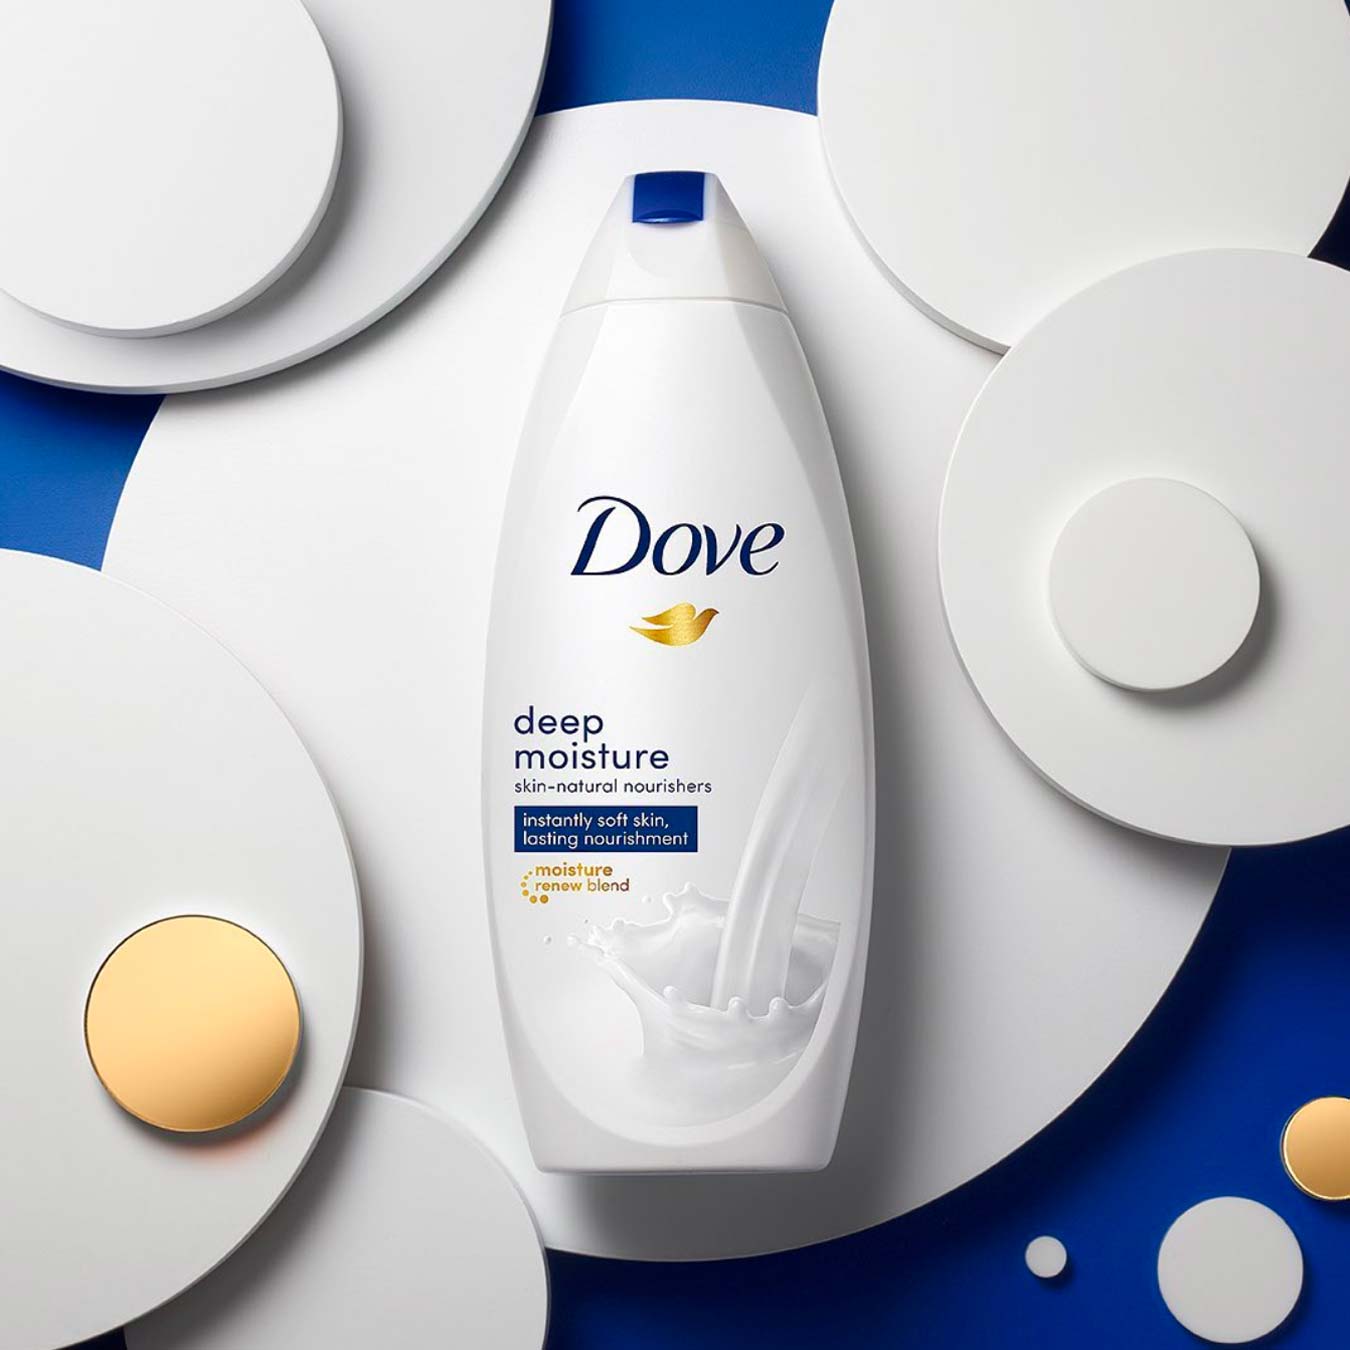 Is Dove Cruelty-Free &amp; Vegan in 2021? - And Why It's Complicated